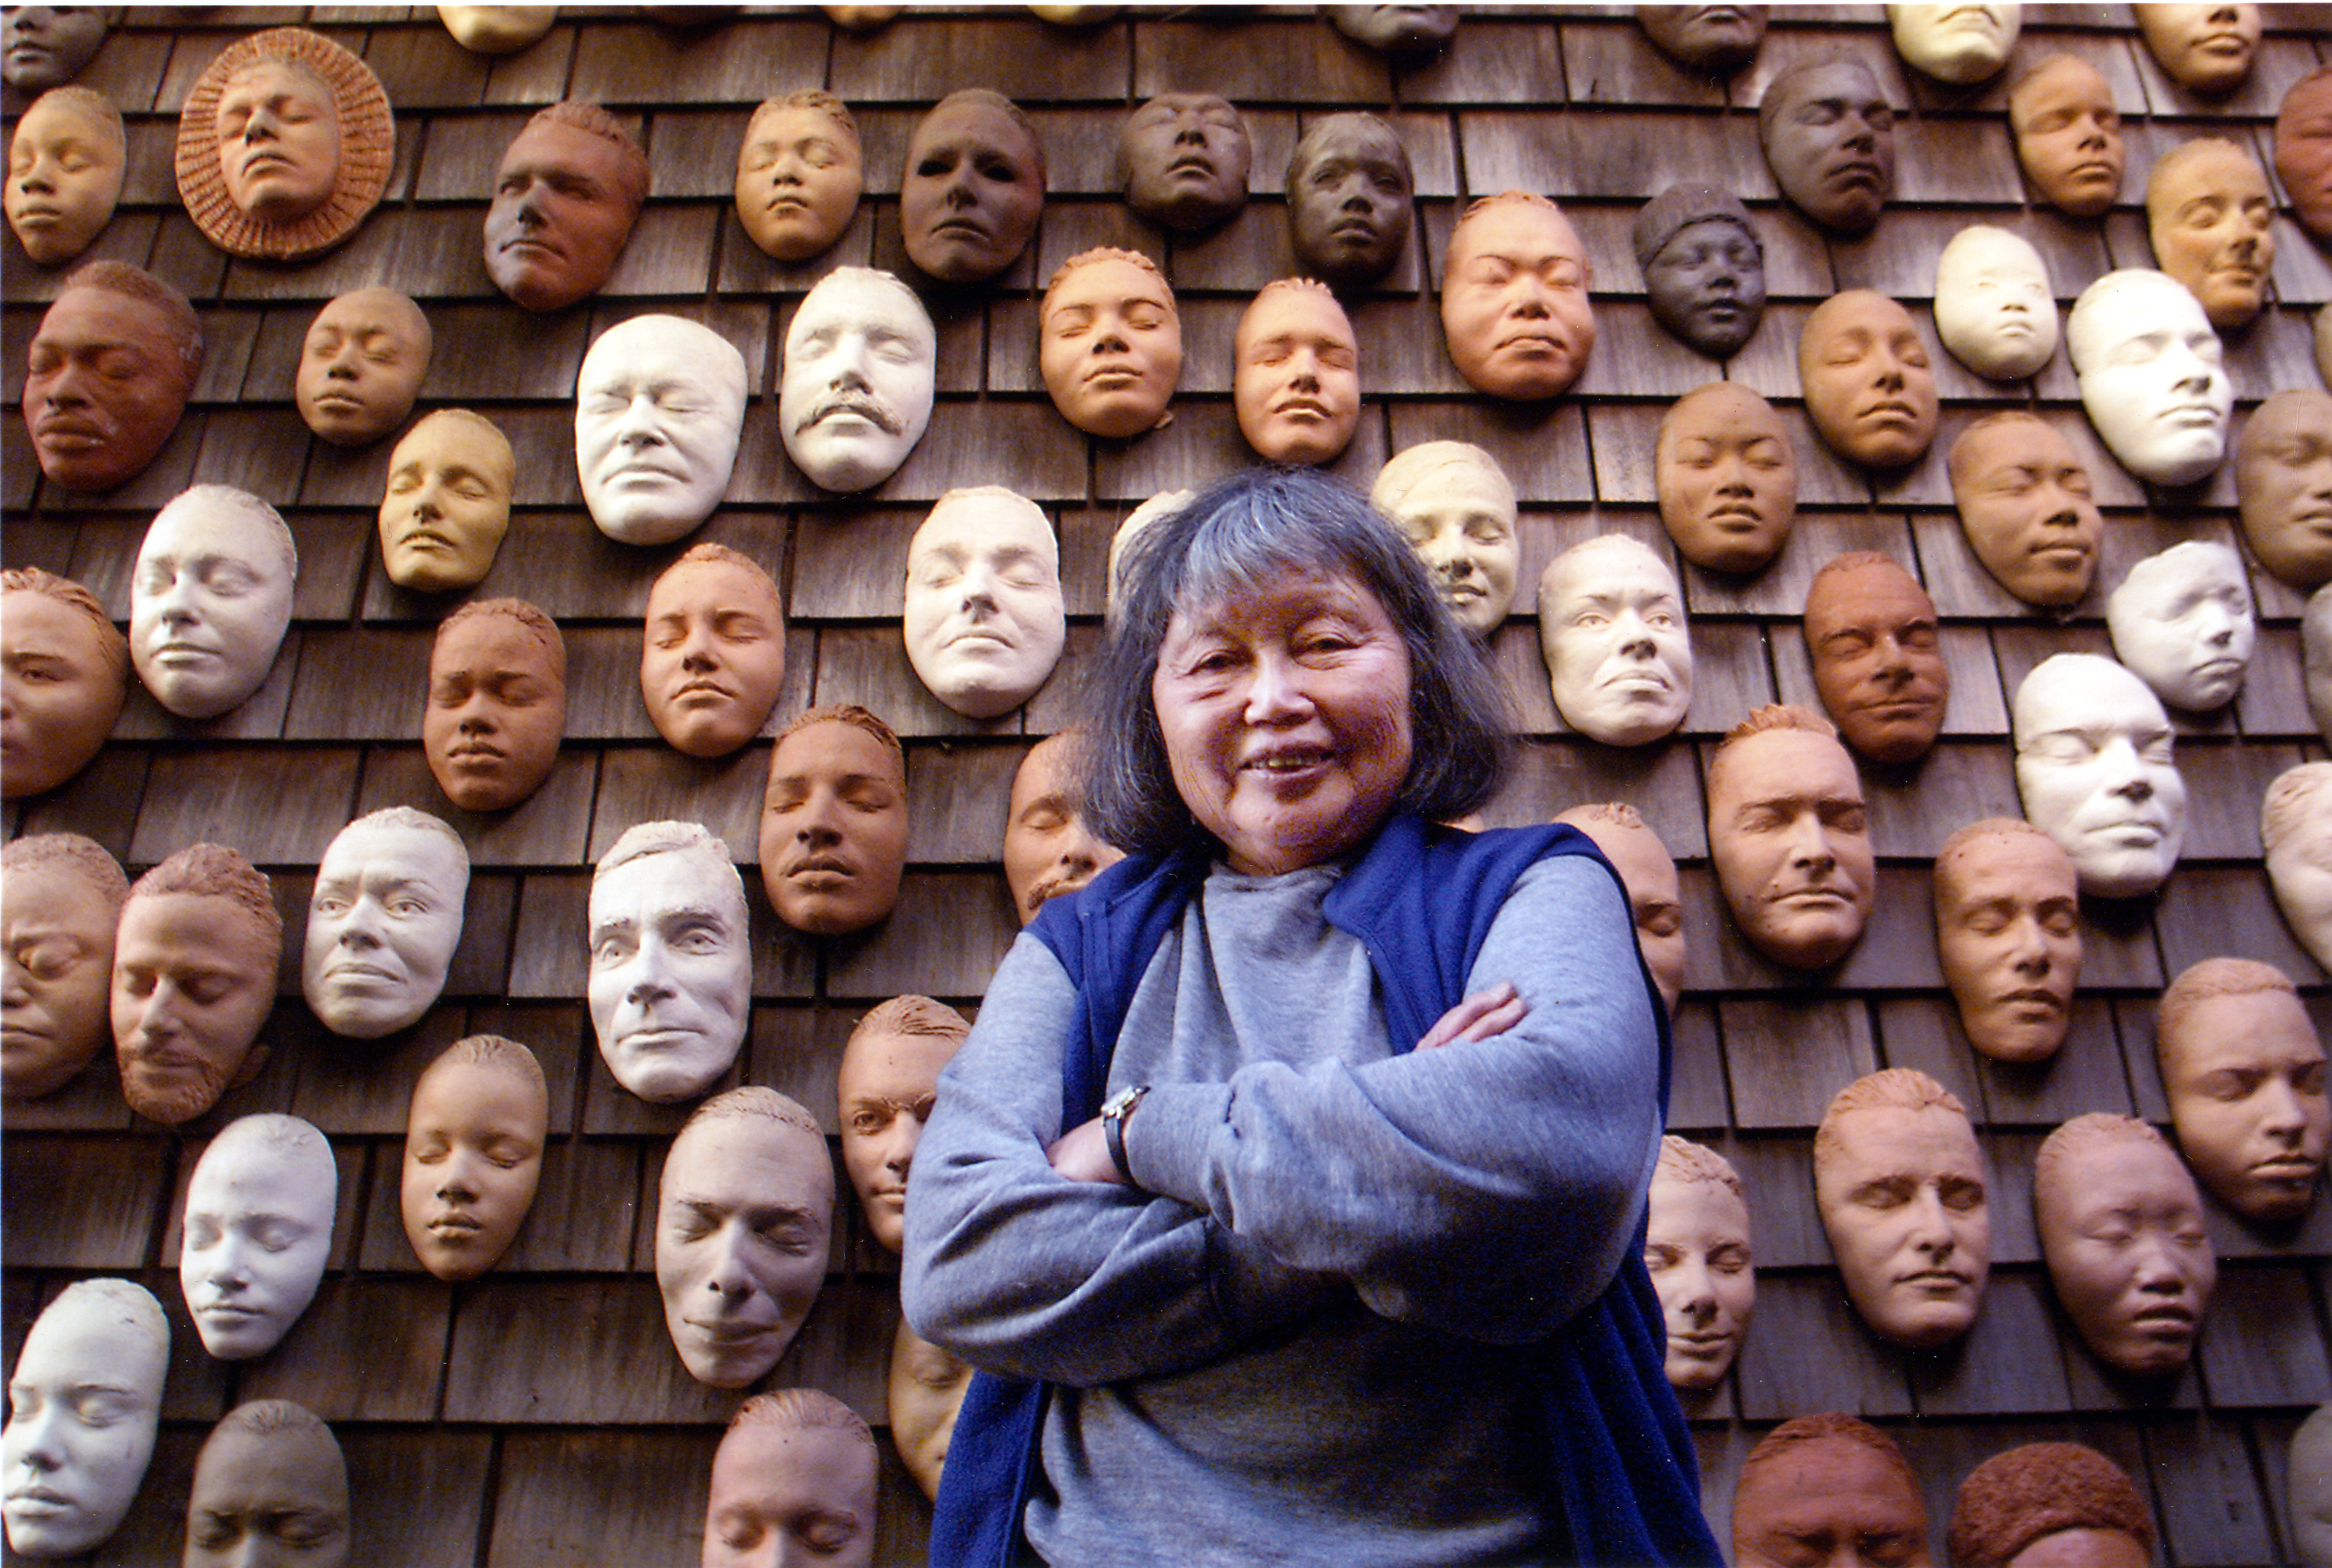 Ruth Asawa with life masks on the exterior wall of her house. Photography by Terry Schmitt. Artwork: ‘Untitled (LC.012, Wall of Masks),’ circa 1966–2000. Ceramic, bisque-fired clay. © 2022 Ruth Asawa Lanier, Inc. / Artists Rights Society (ARS), New York. Courtesy David Zwirner